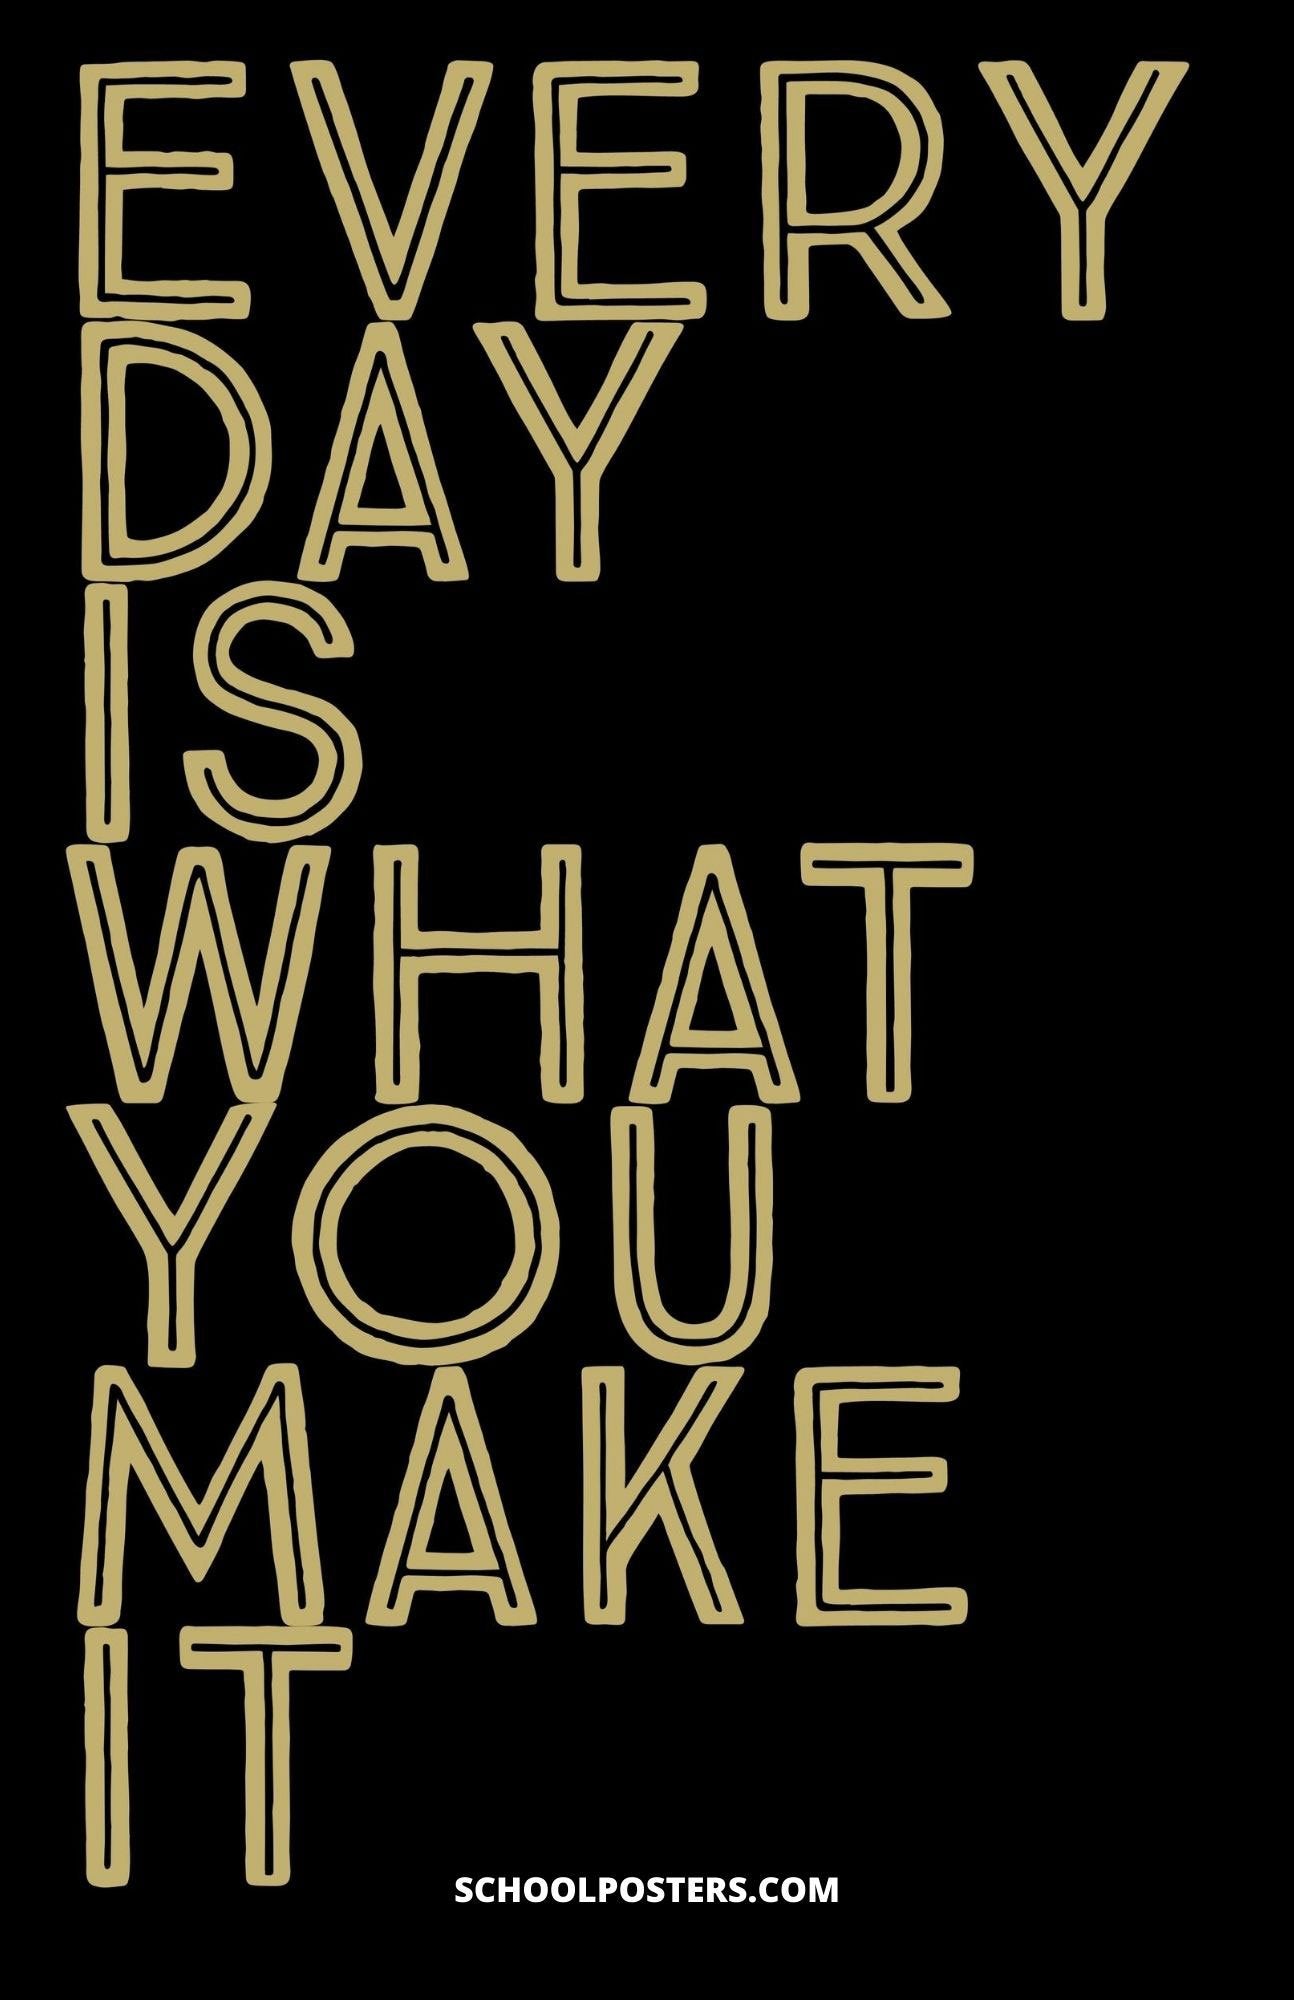 Every Day Is What You Make It Poster